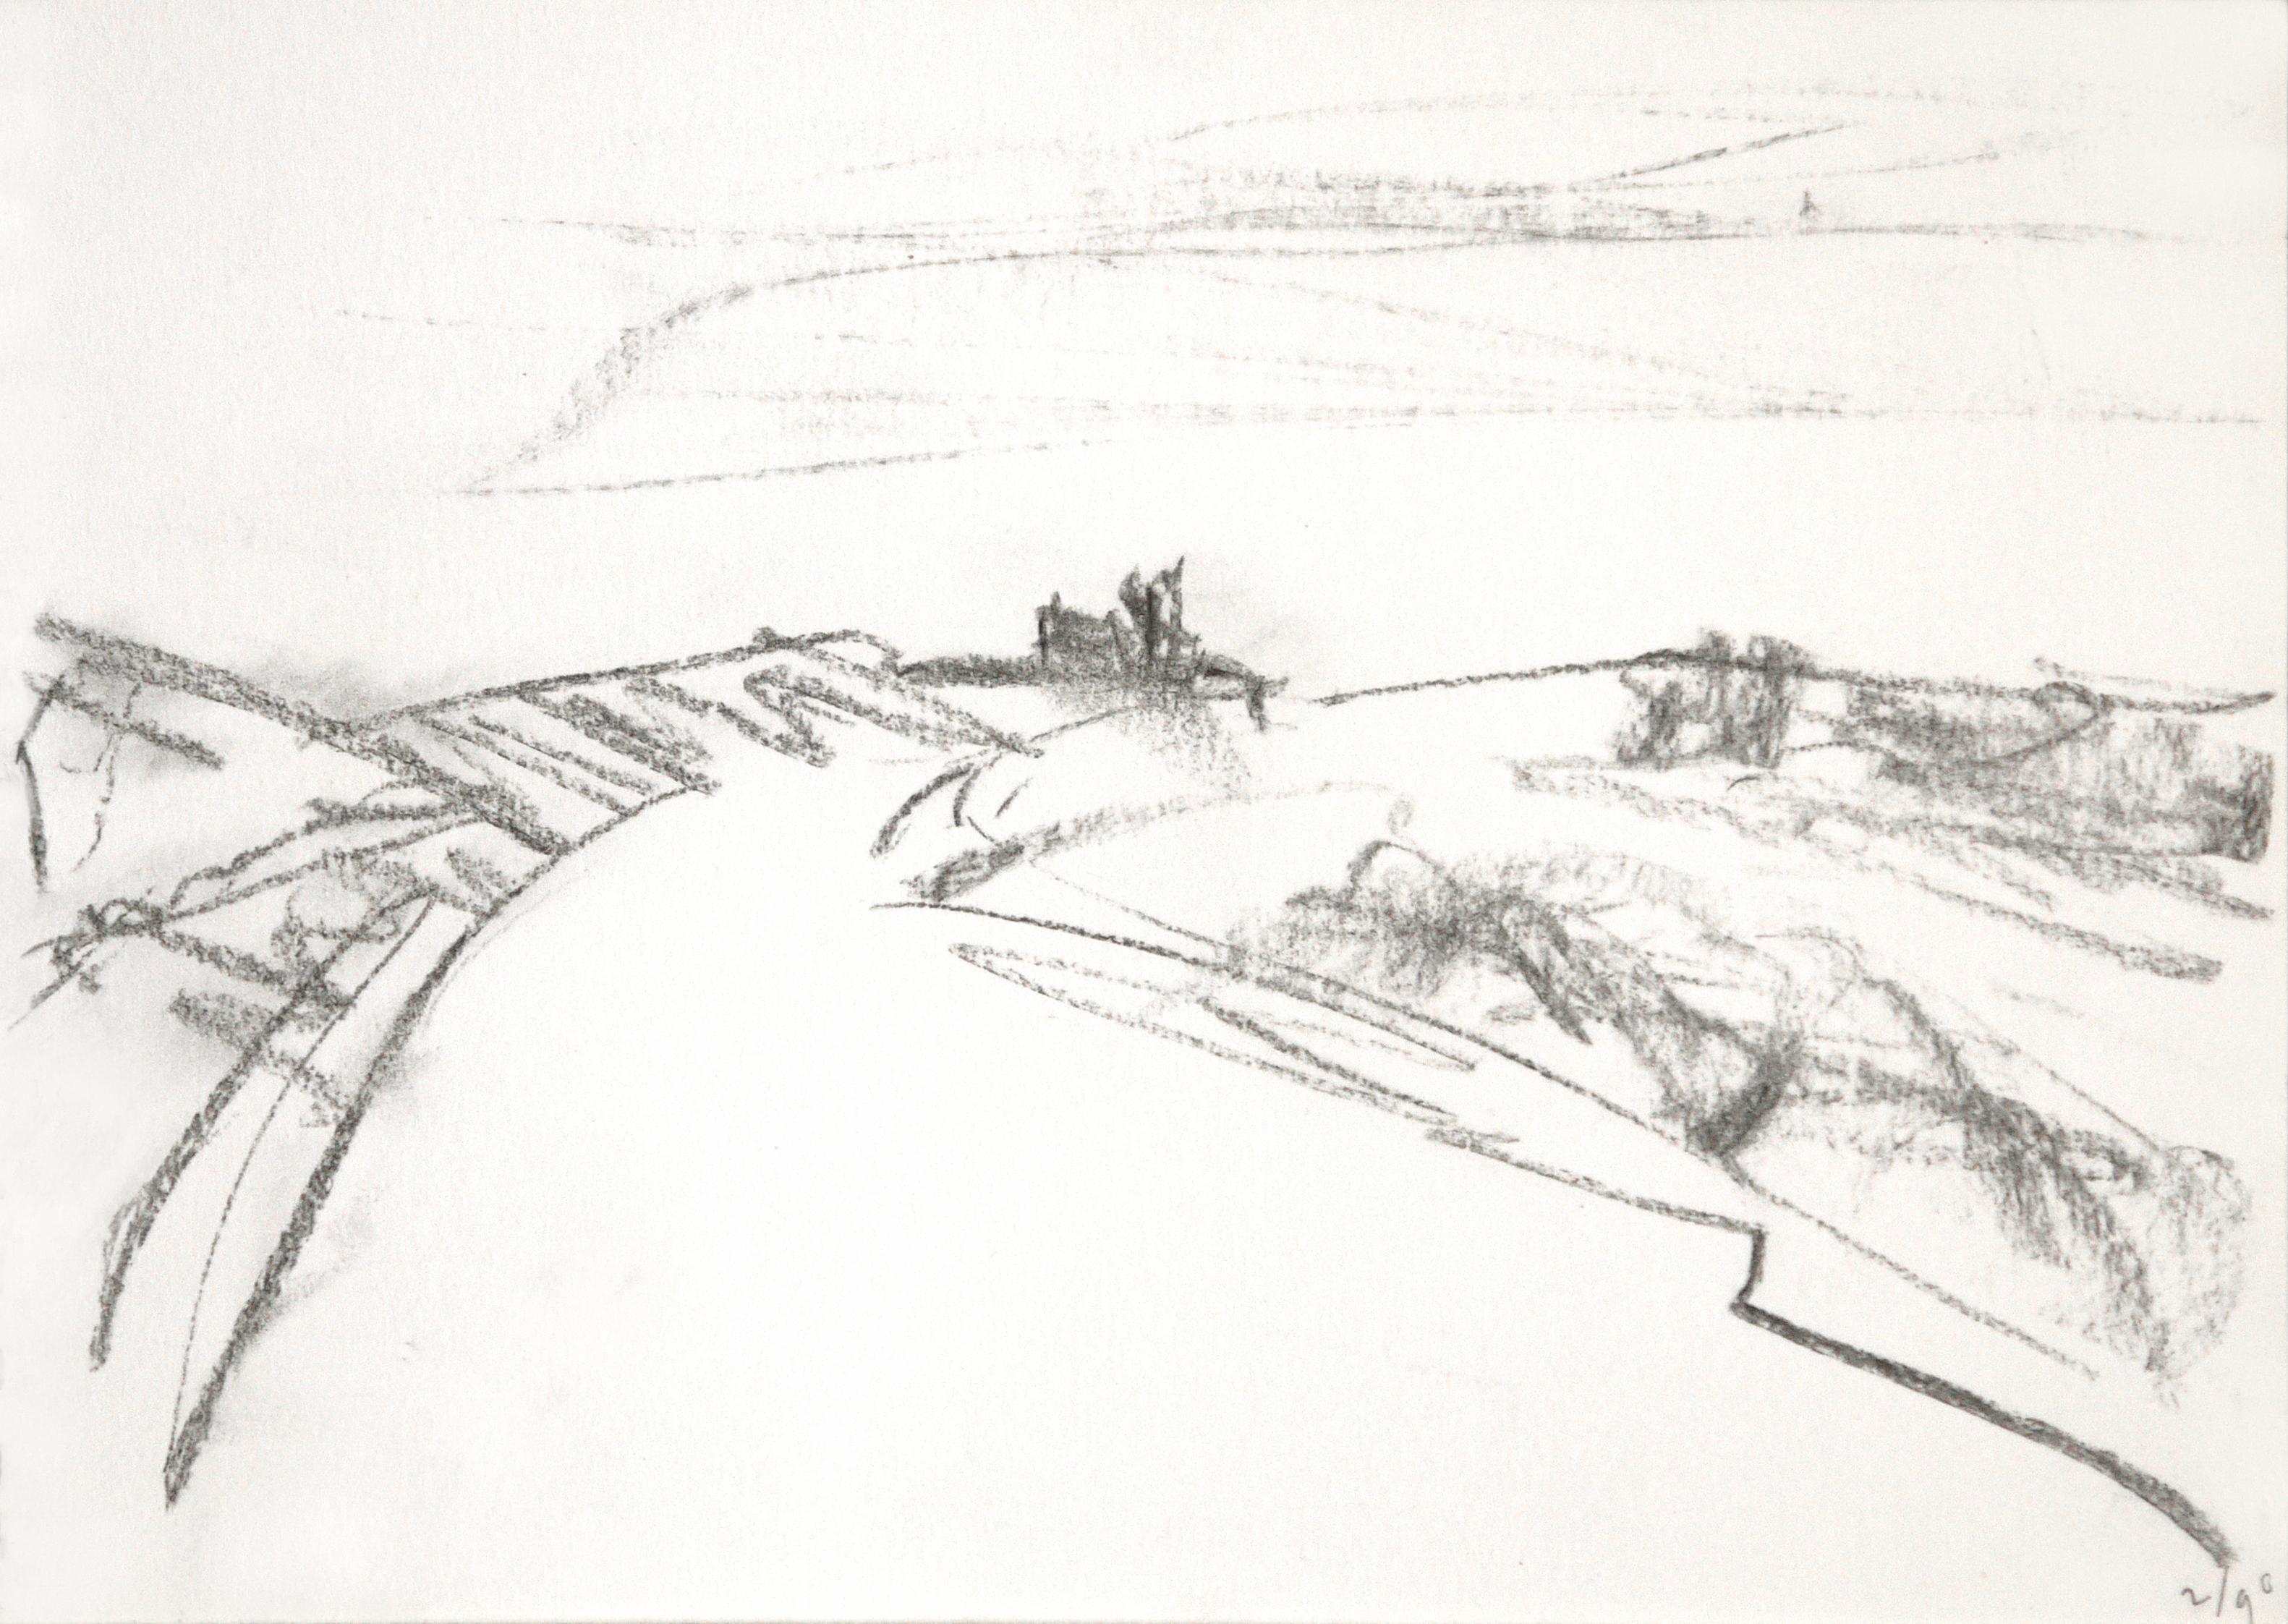 1990 - 'sketch of dutch coast', pencil drawing on paper, seascape near zandvoort and the sandy beach of the netherlands; a high resolution art image in free download to print, public domain / commons, cc-by, artist, fons heijnsbroek photo